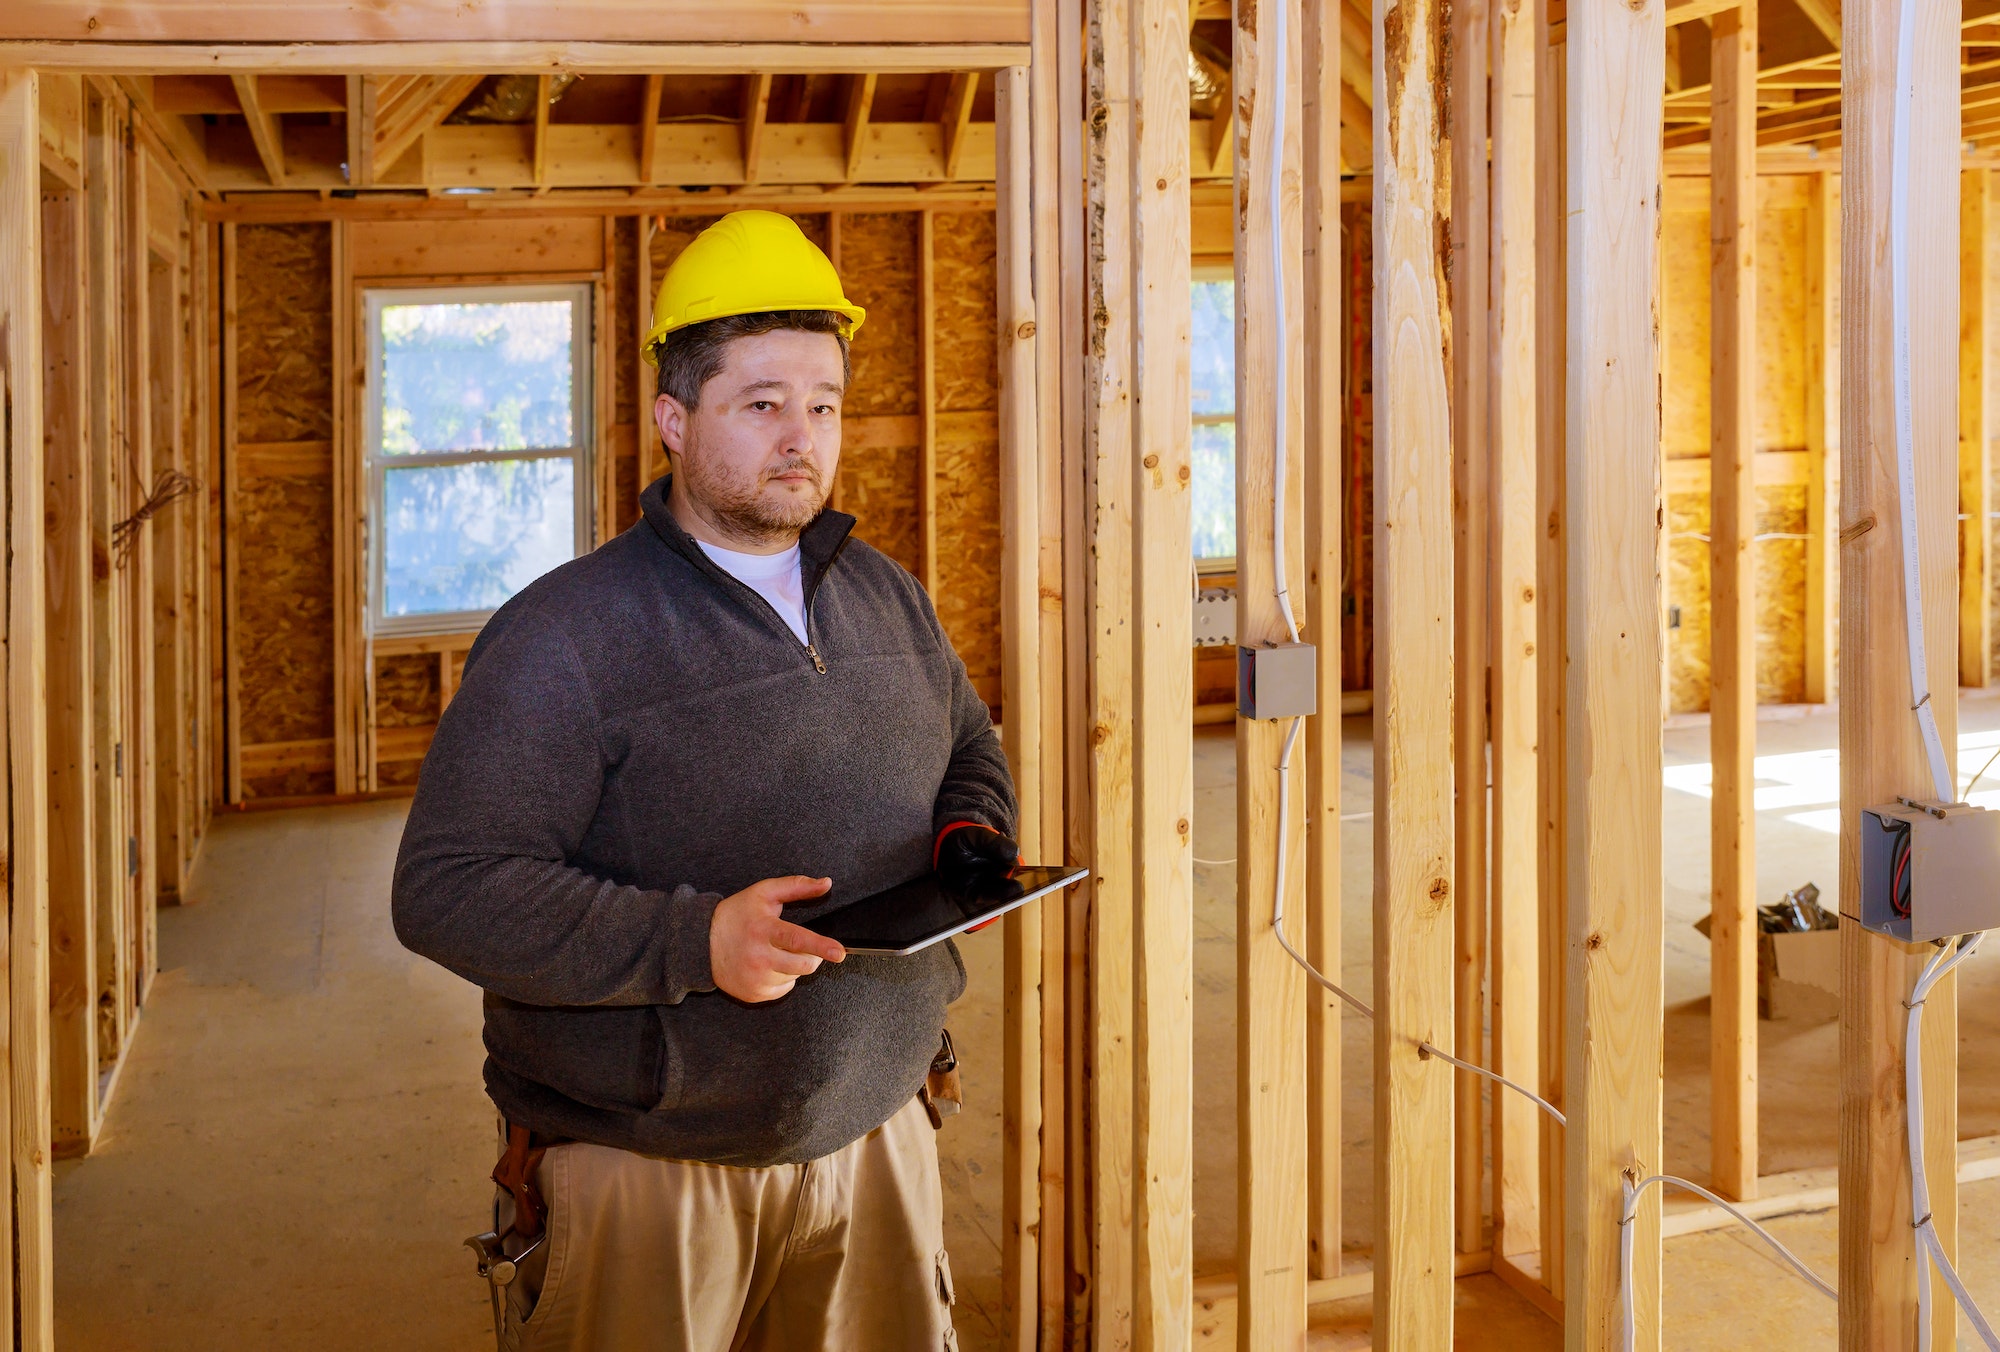 Inspector checking building during house construction in the tablet PC with hard hat